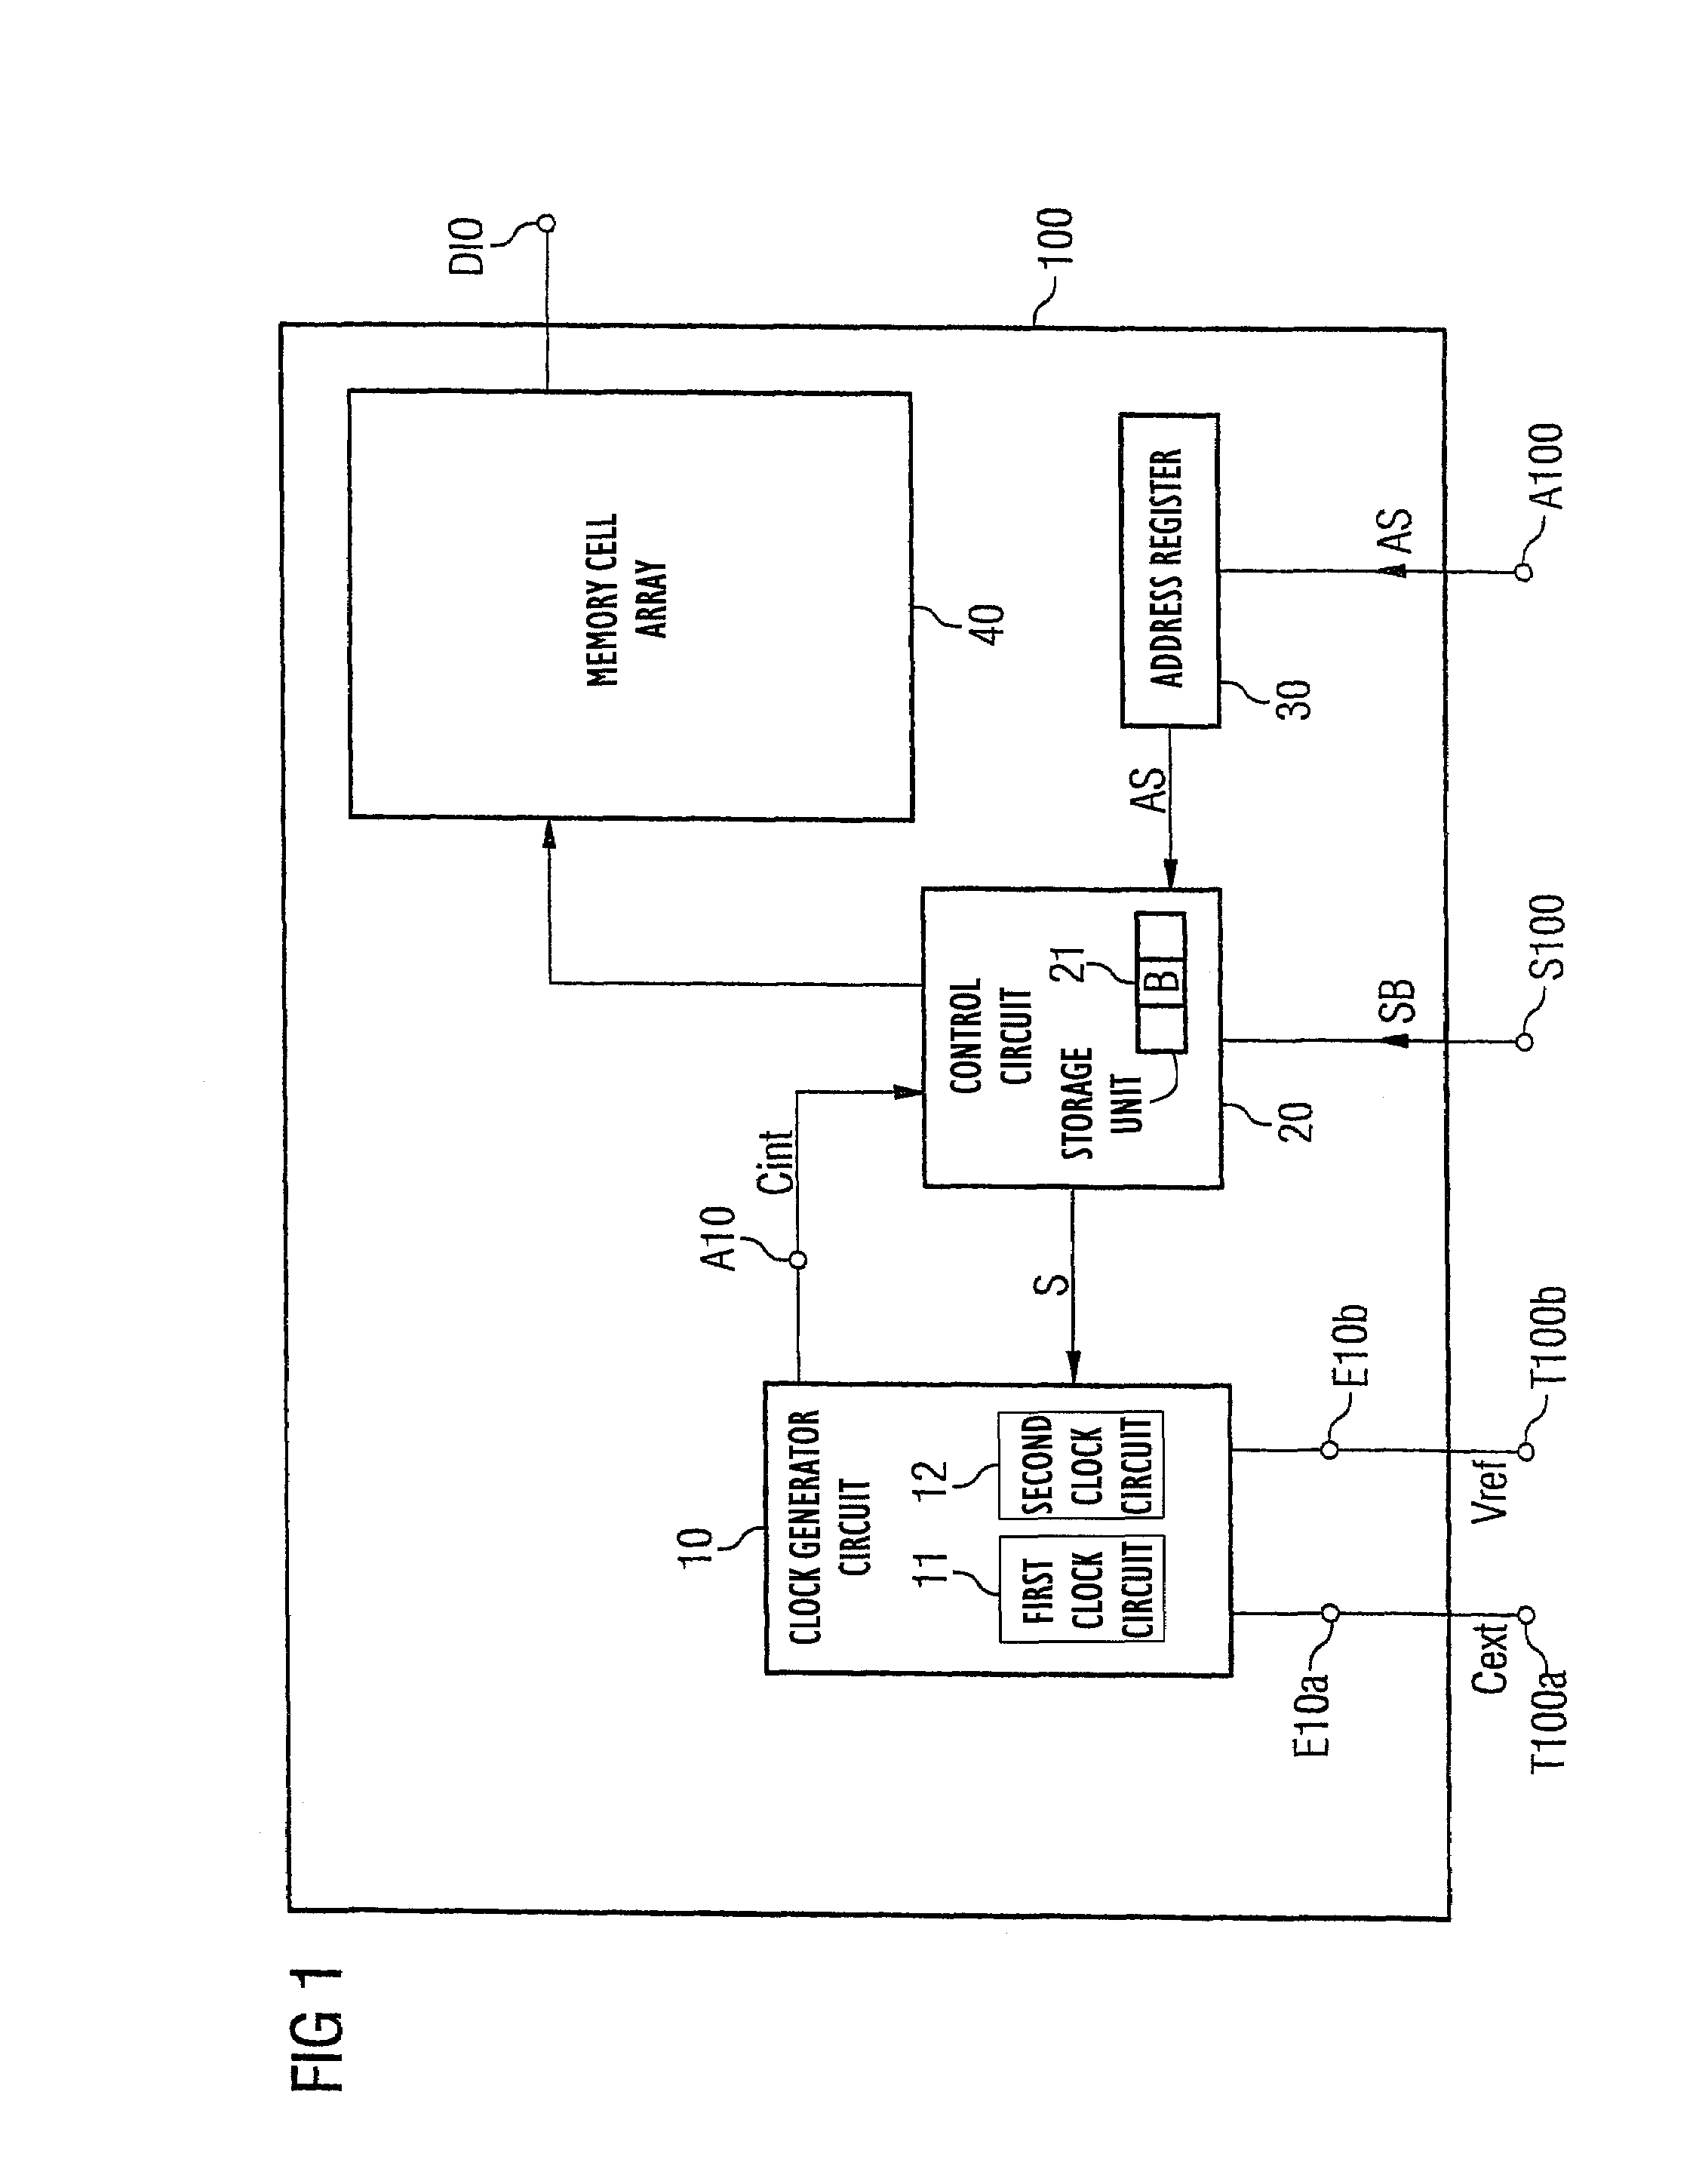 Integrated semiconductor memory with clock generation